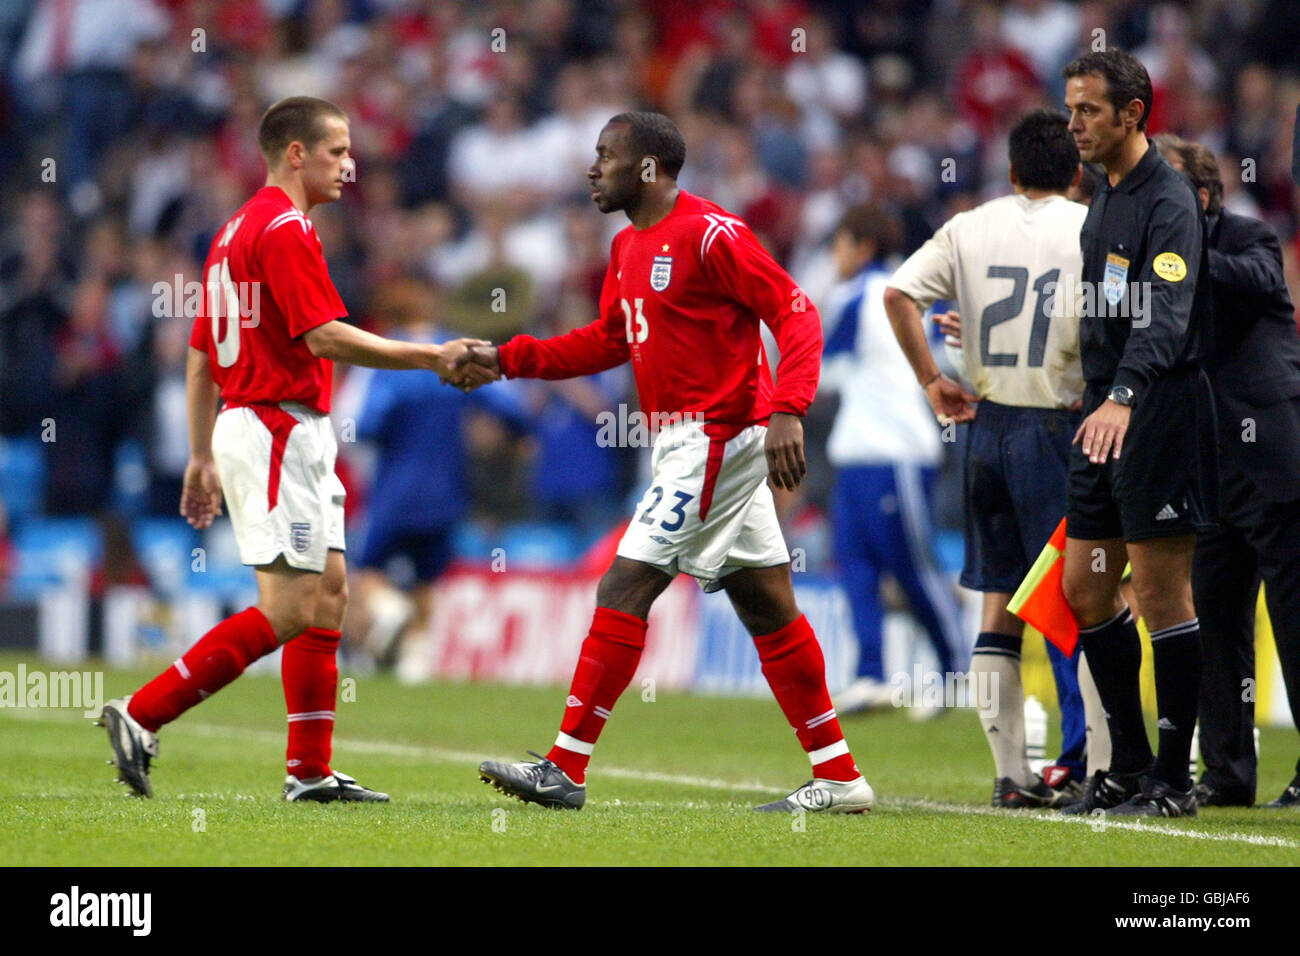 Soccer - International Friendly - The FA Summer Tournament - England v Japan. England's Michael Owen is replaced by Darius Vassell Stock Photo